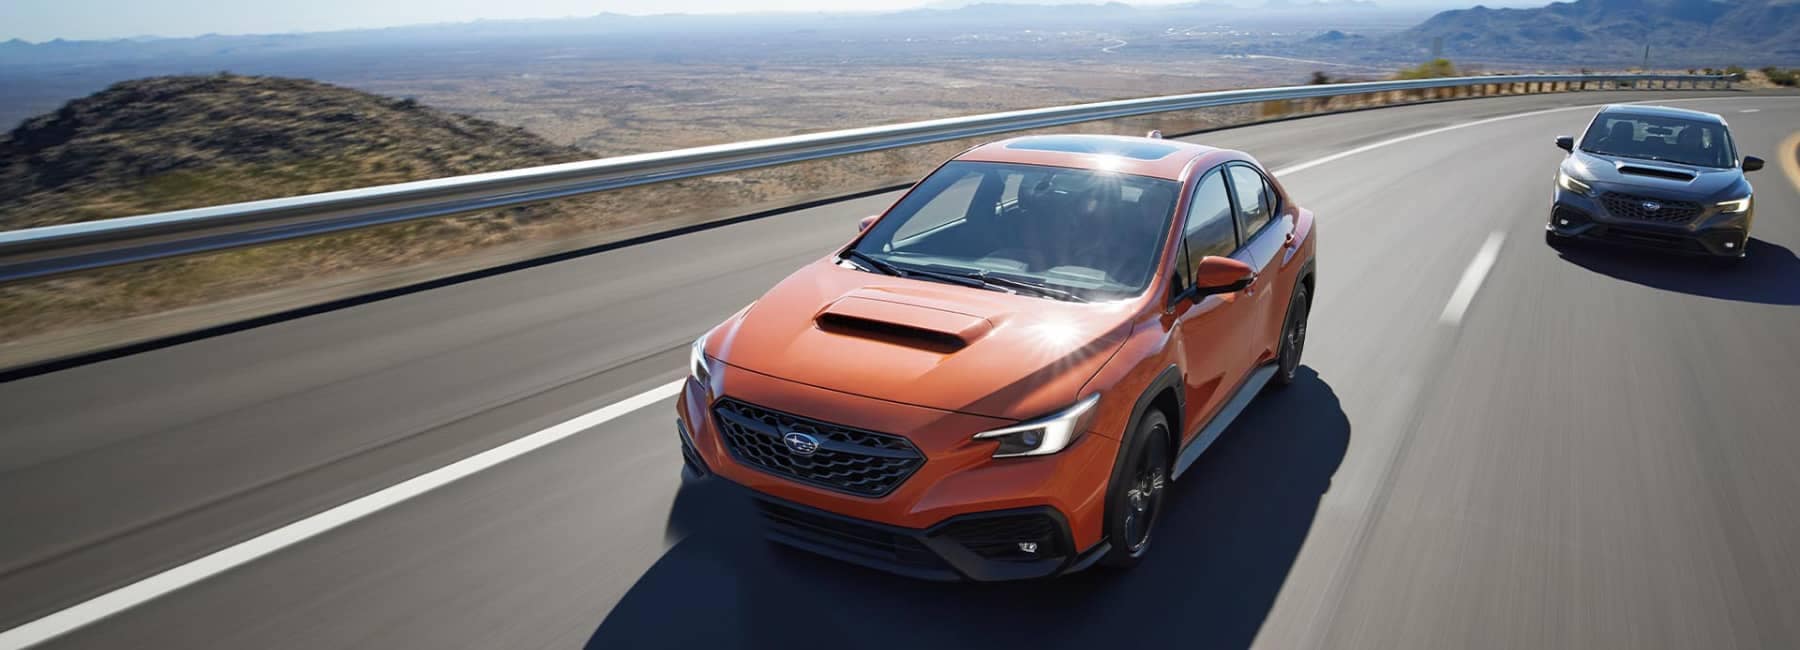 2022 Subaru WRX front view-2 cars on highway